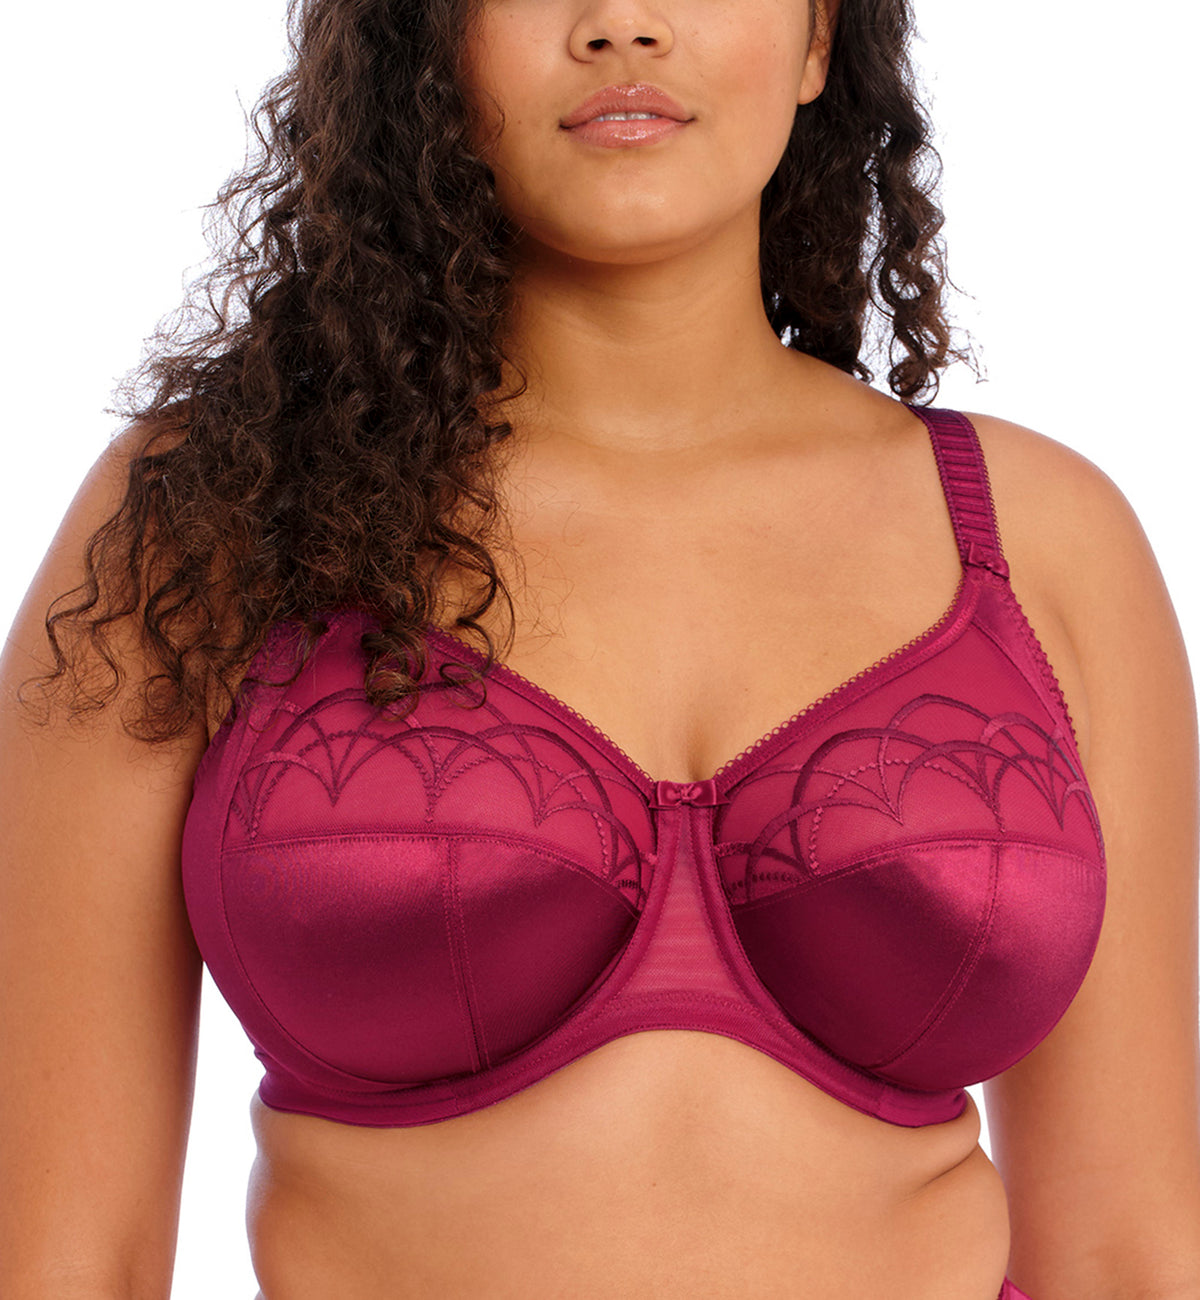 Elomi Cate Embroidered Full Cup Banded Underwire Bra (4030),34HH,Berry - Berry,34HH